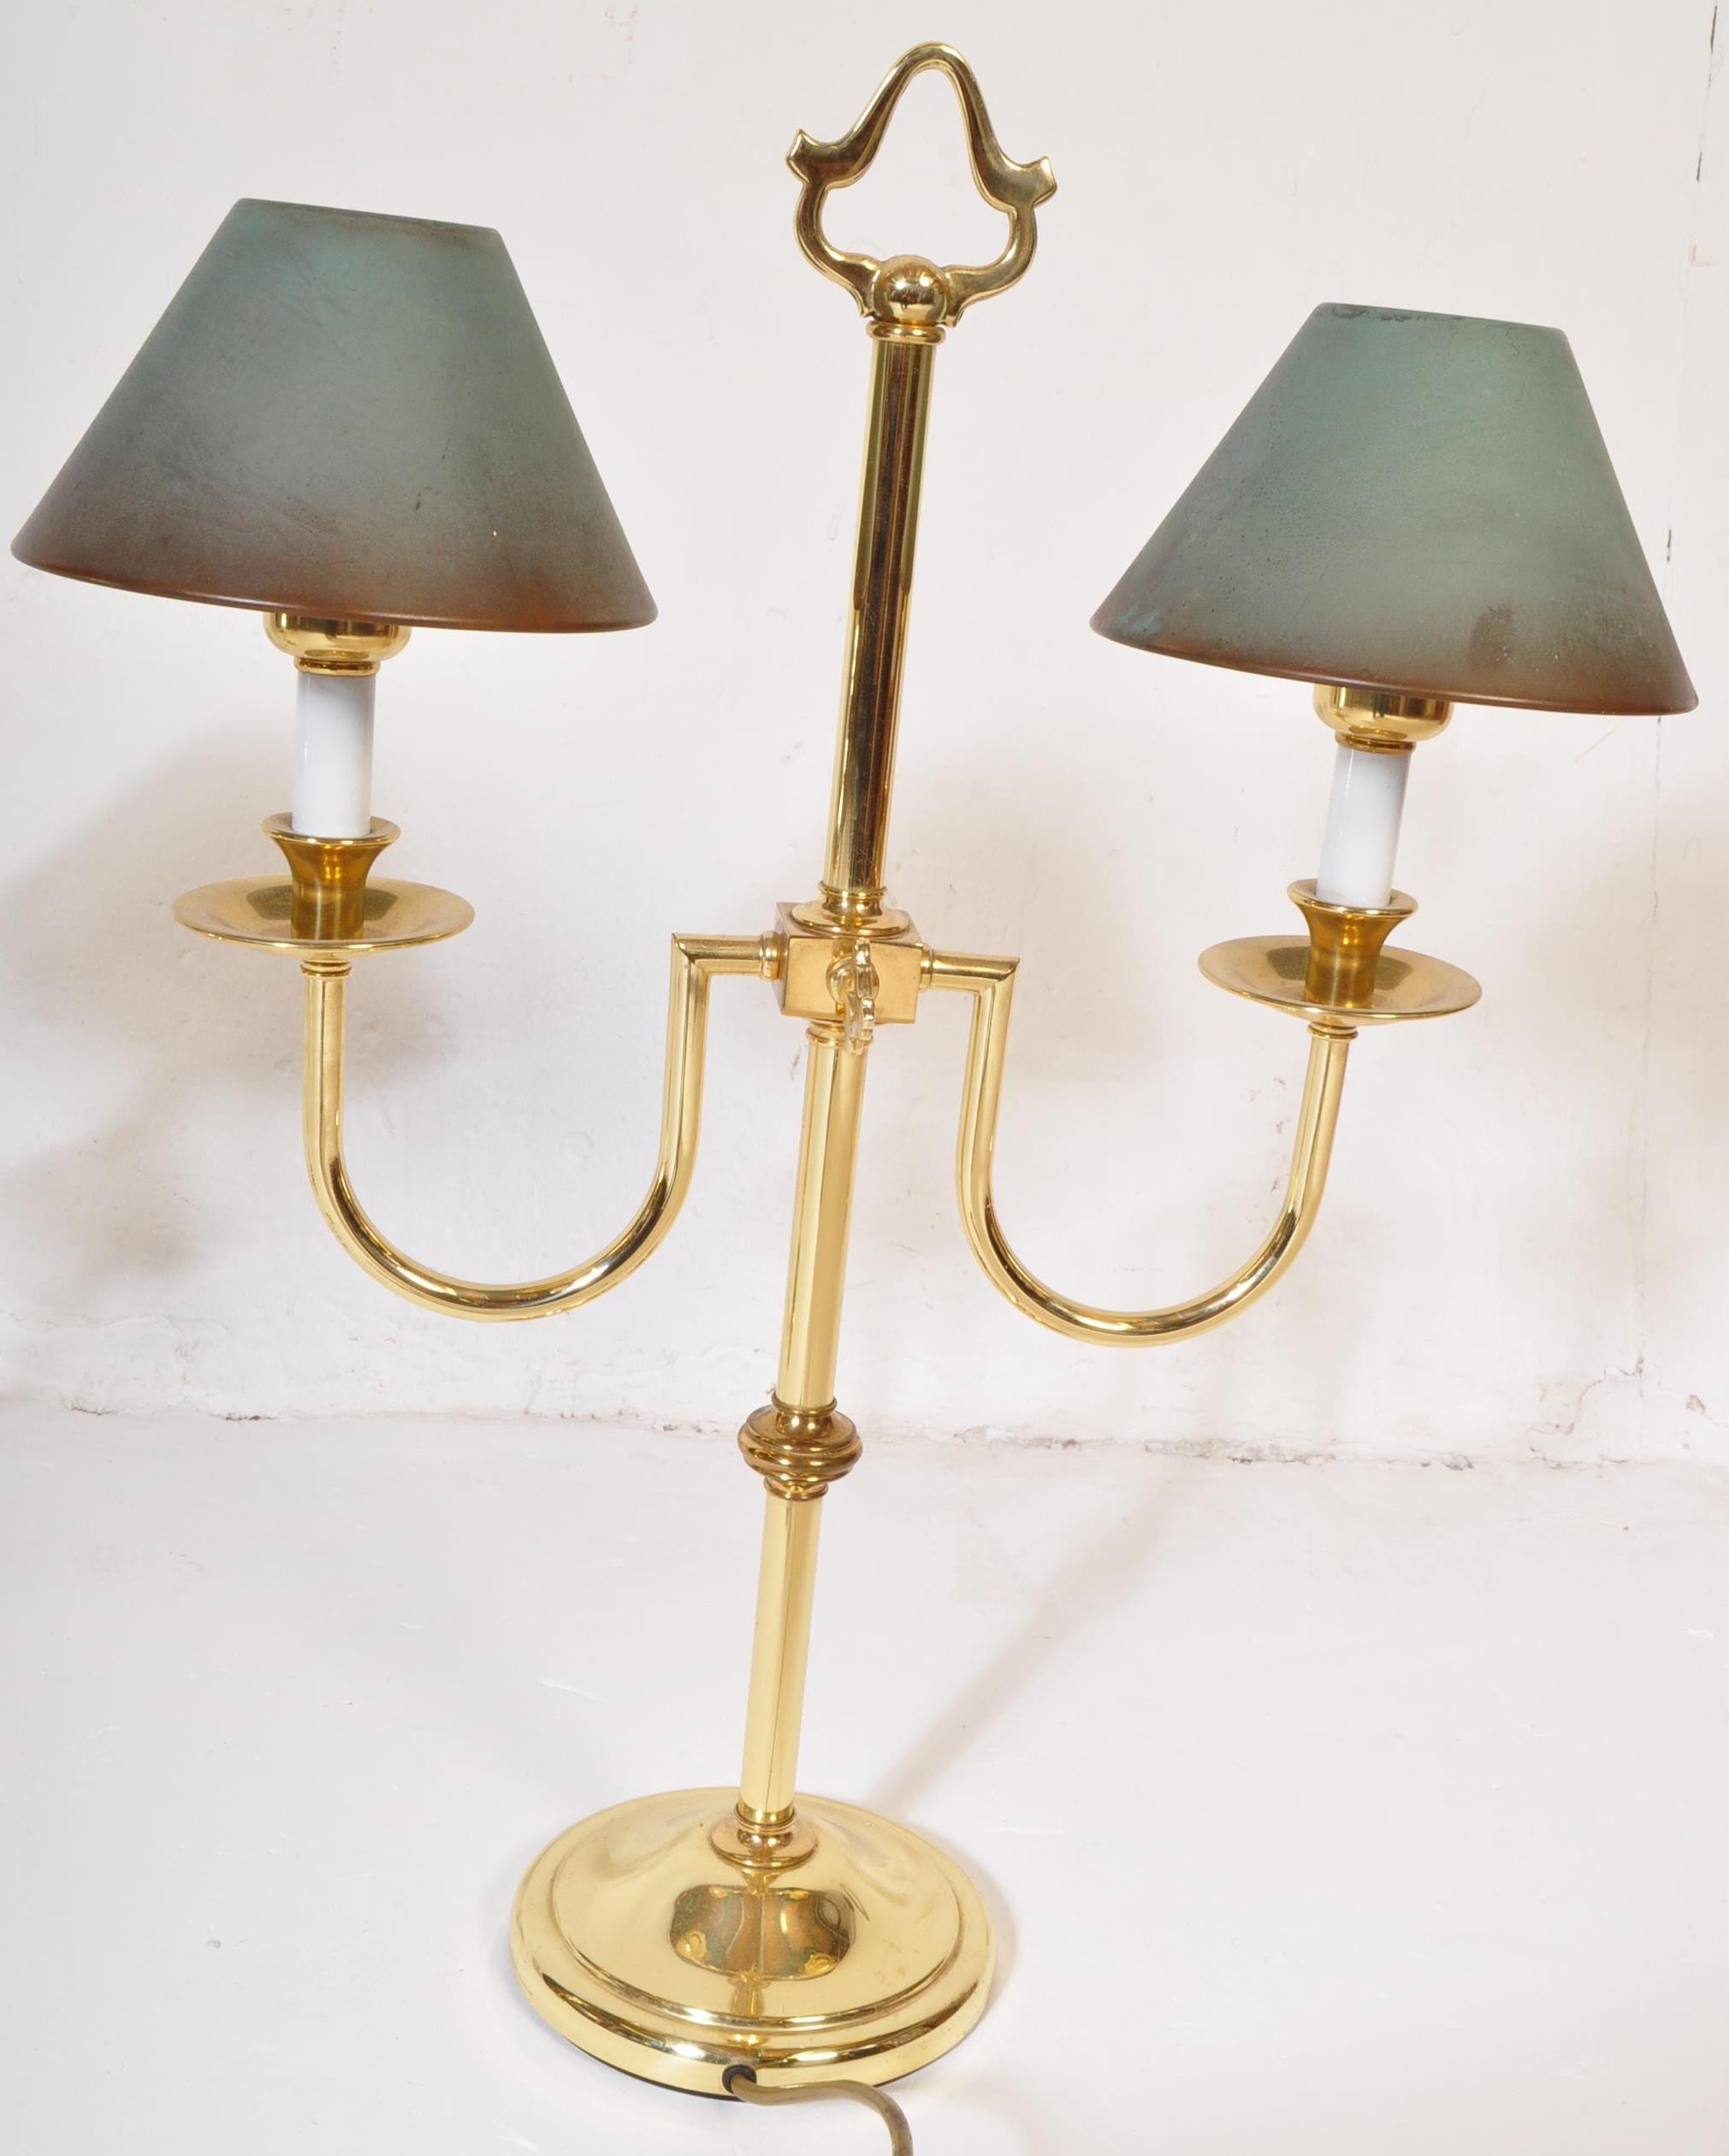 PAIR OF RETRO VINTAGE GILT METAL CASINO TABLE LAMPS - Image 4 of 5